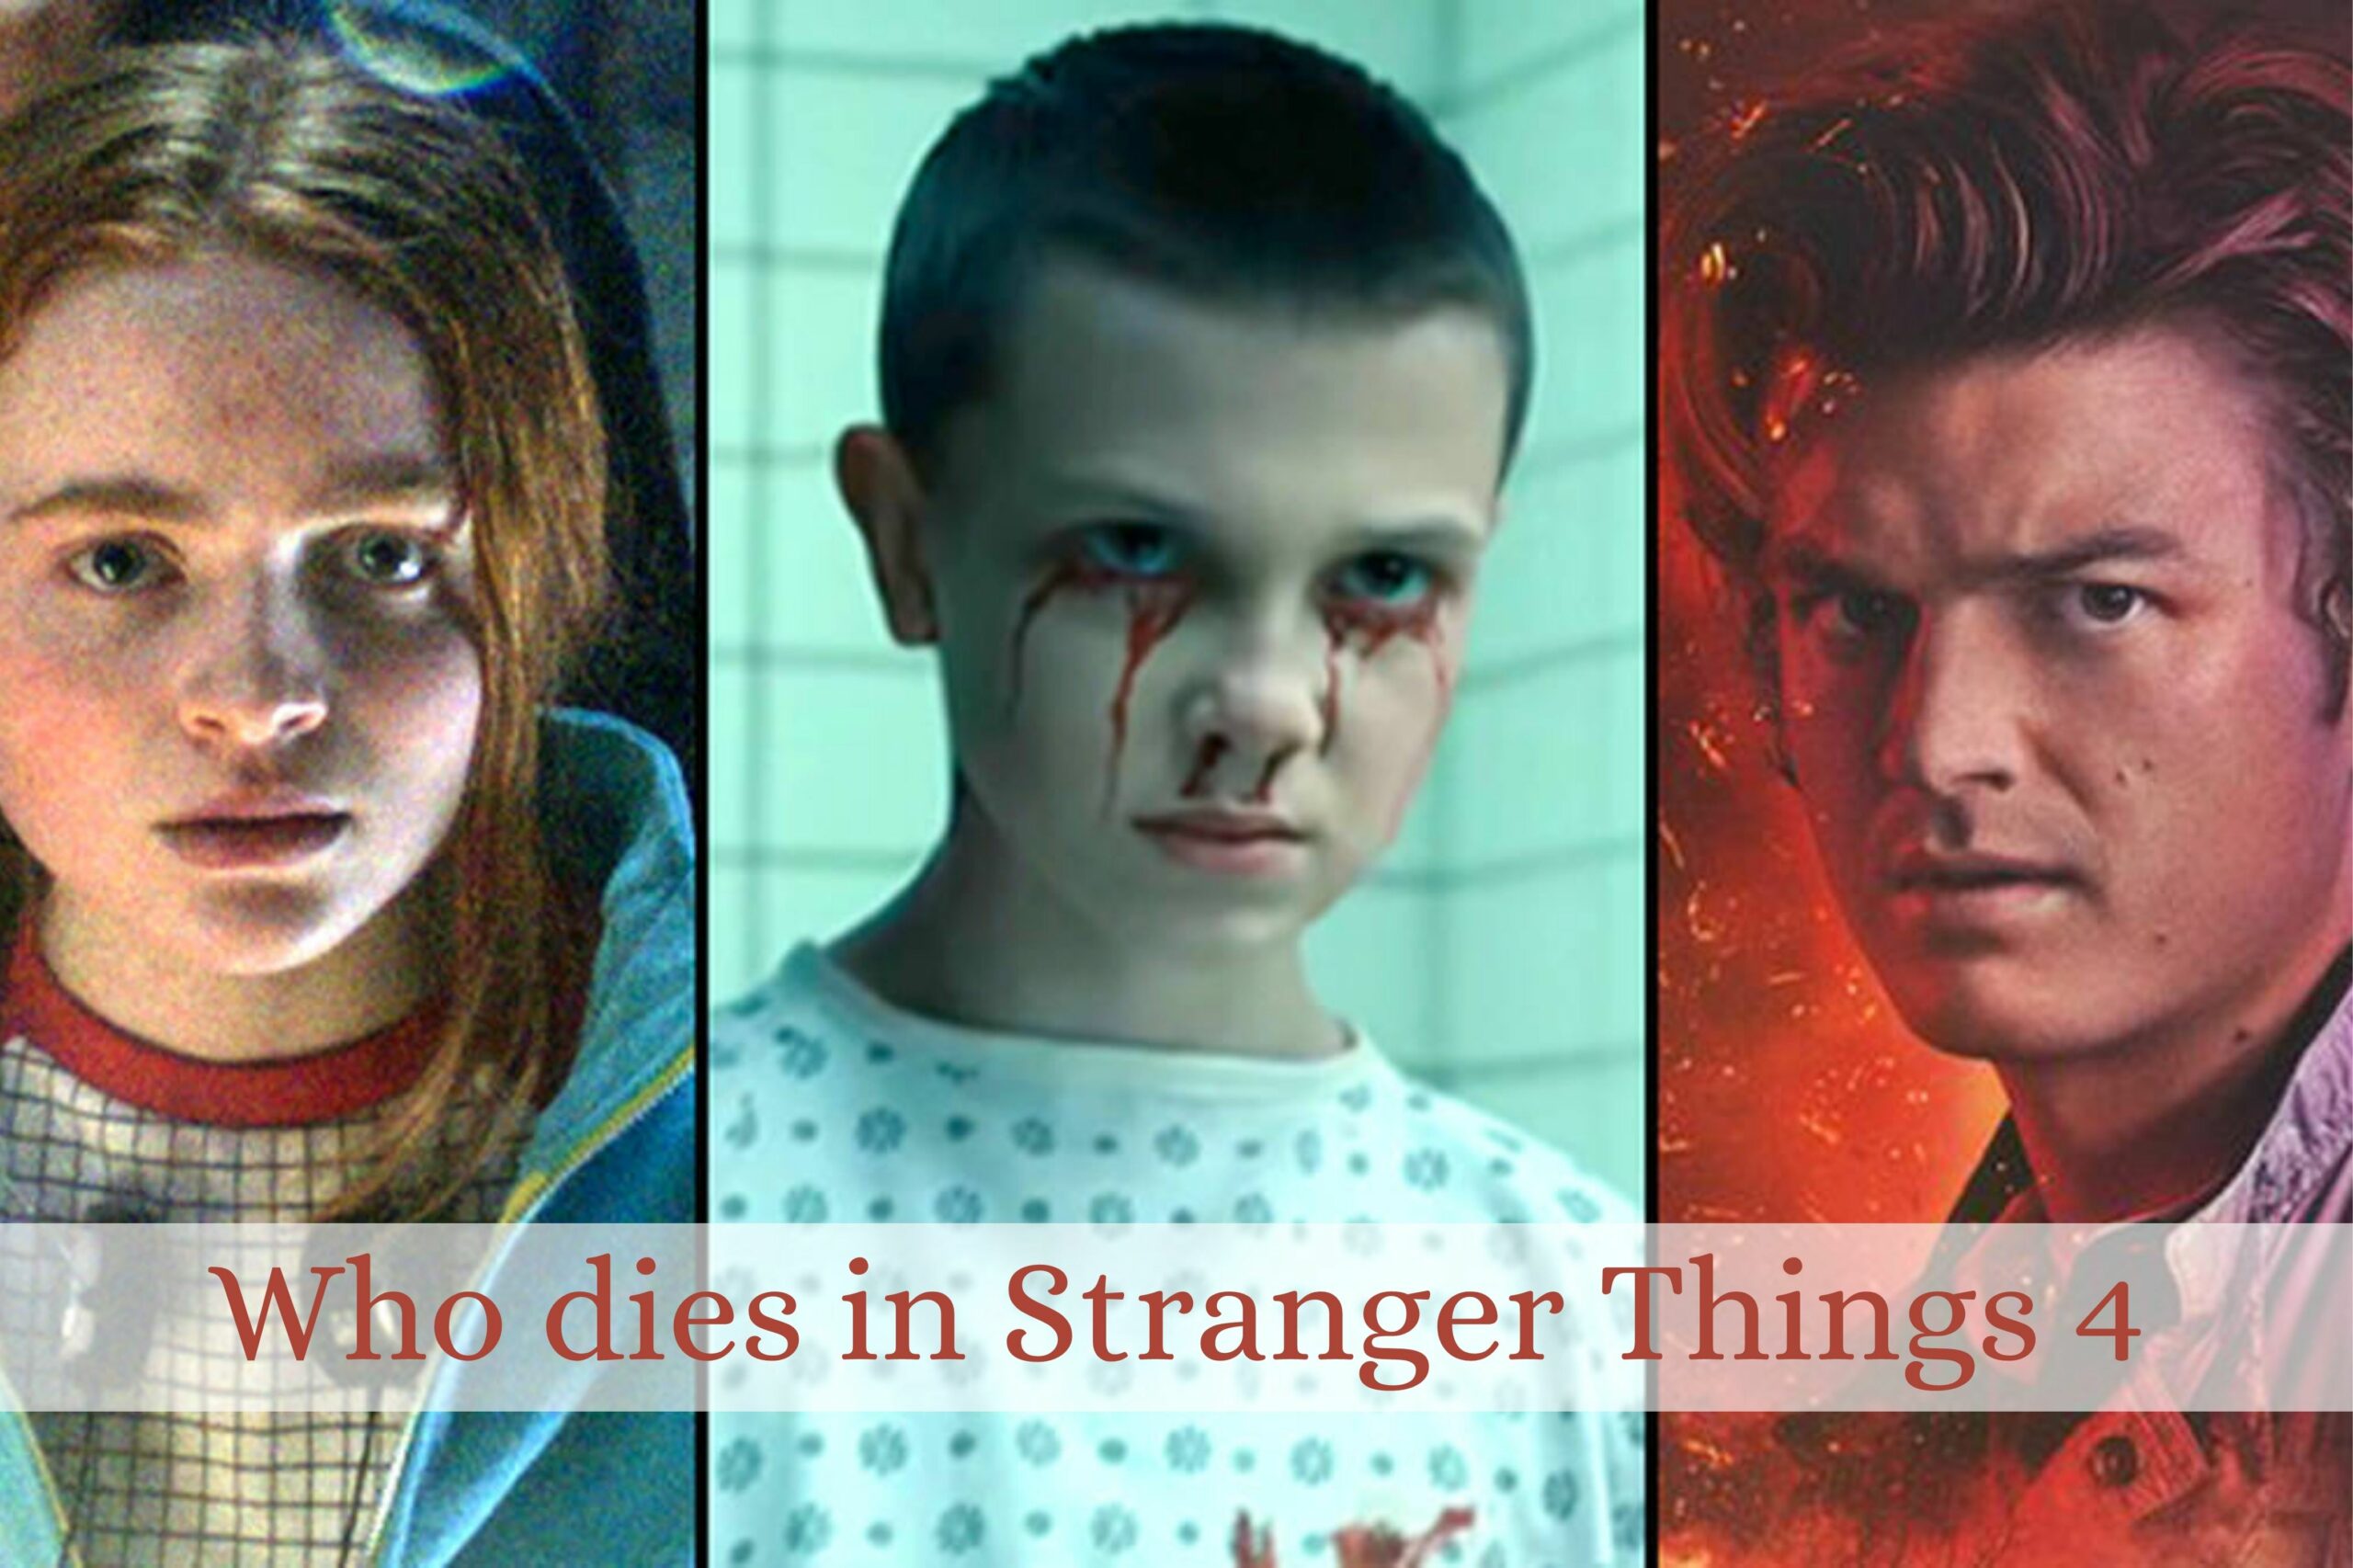 Characters from "Stranger Things" Most Likely To Die In Season 4!